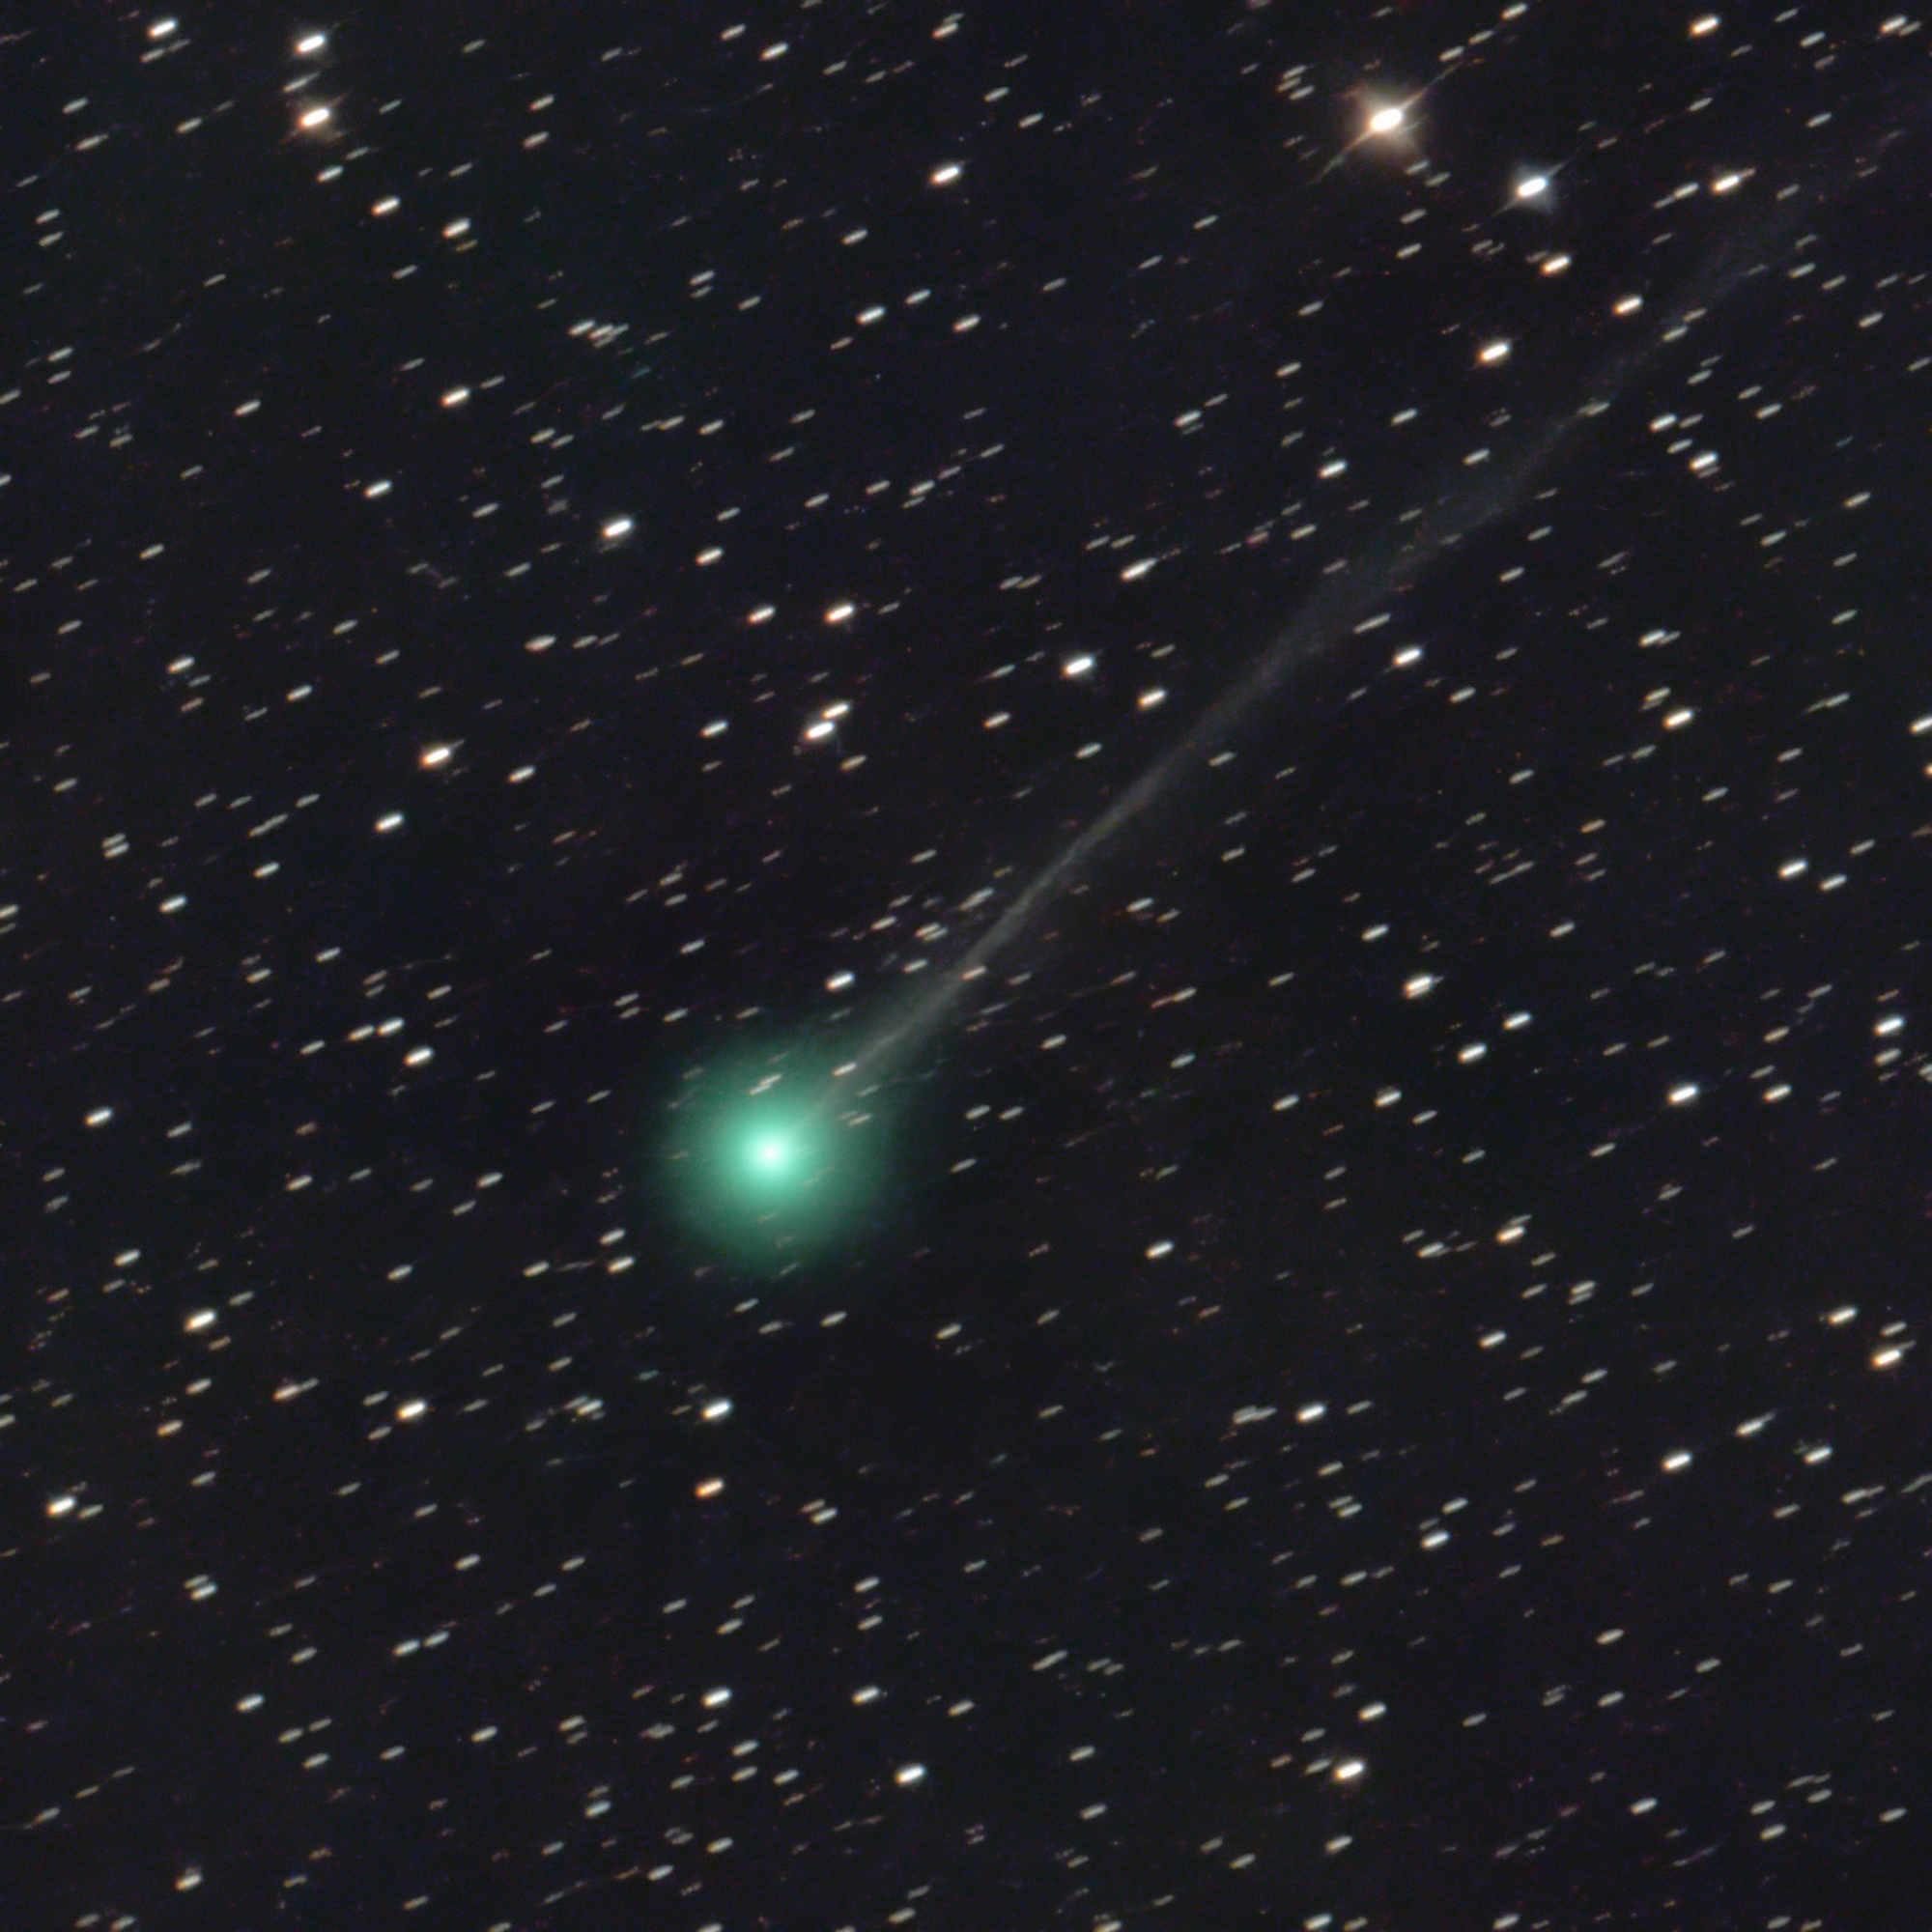 Comet Nishimura close to Earth-Visible in India: Where and How to Watch in India